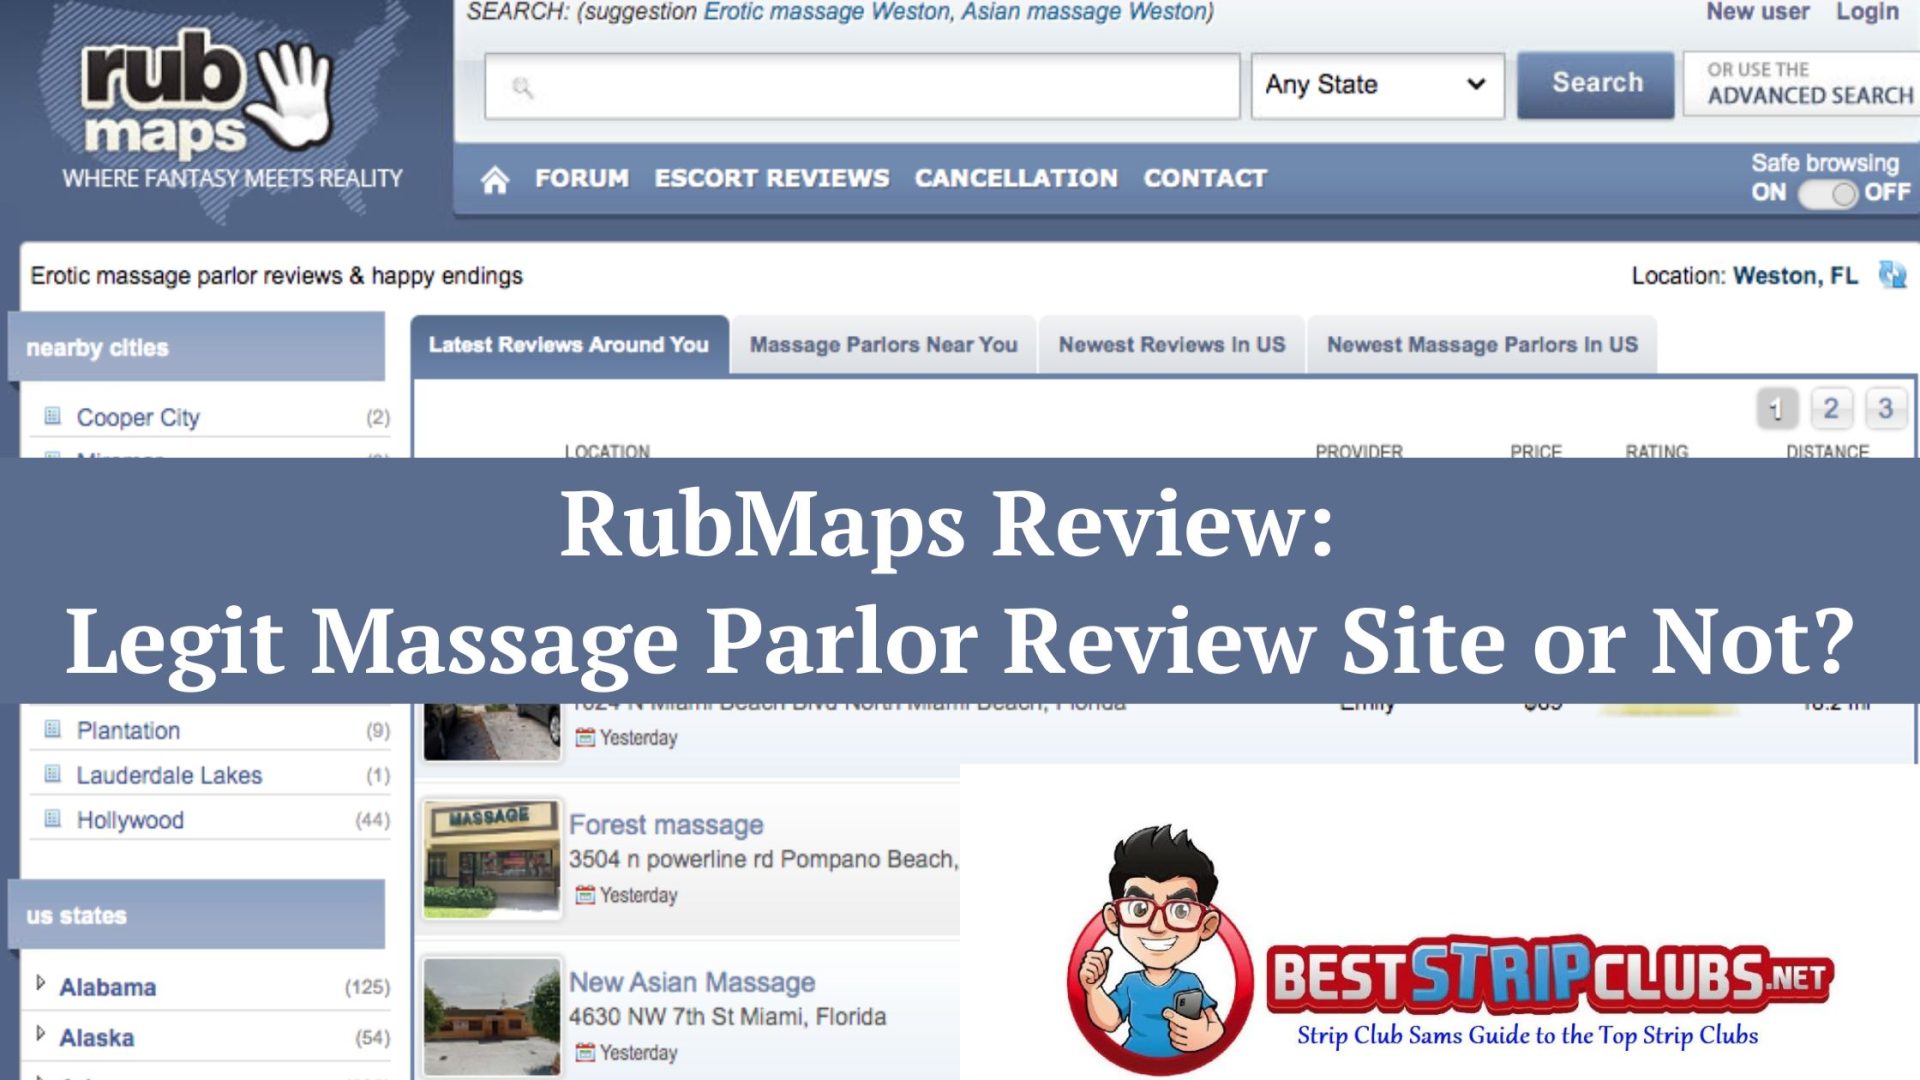 cydney hartfield recommends massage parlor review chicago pic